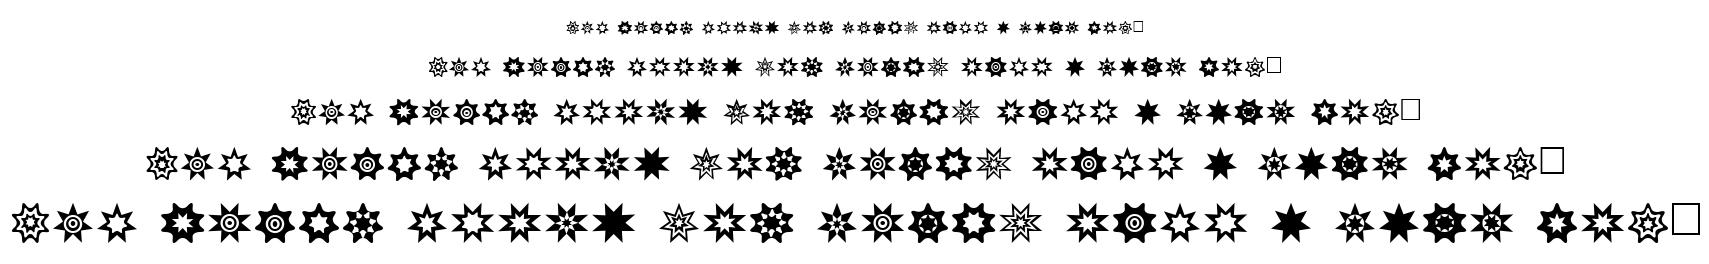 Star Things 2 font